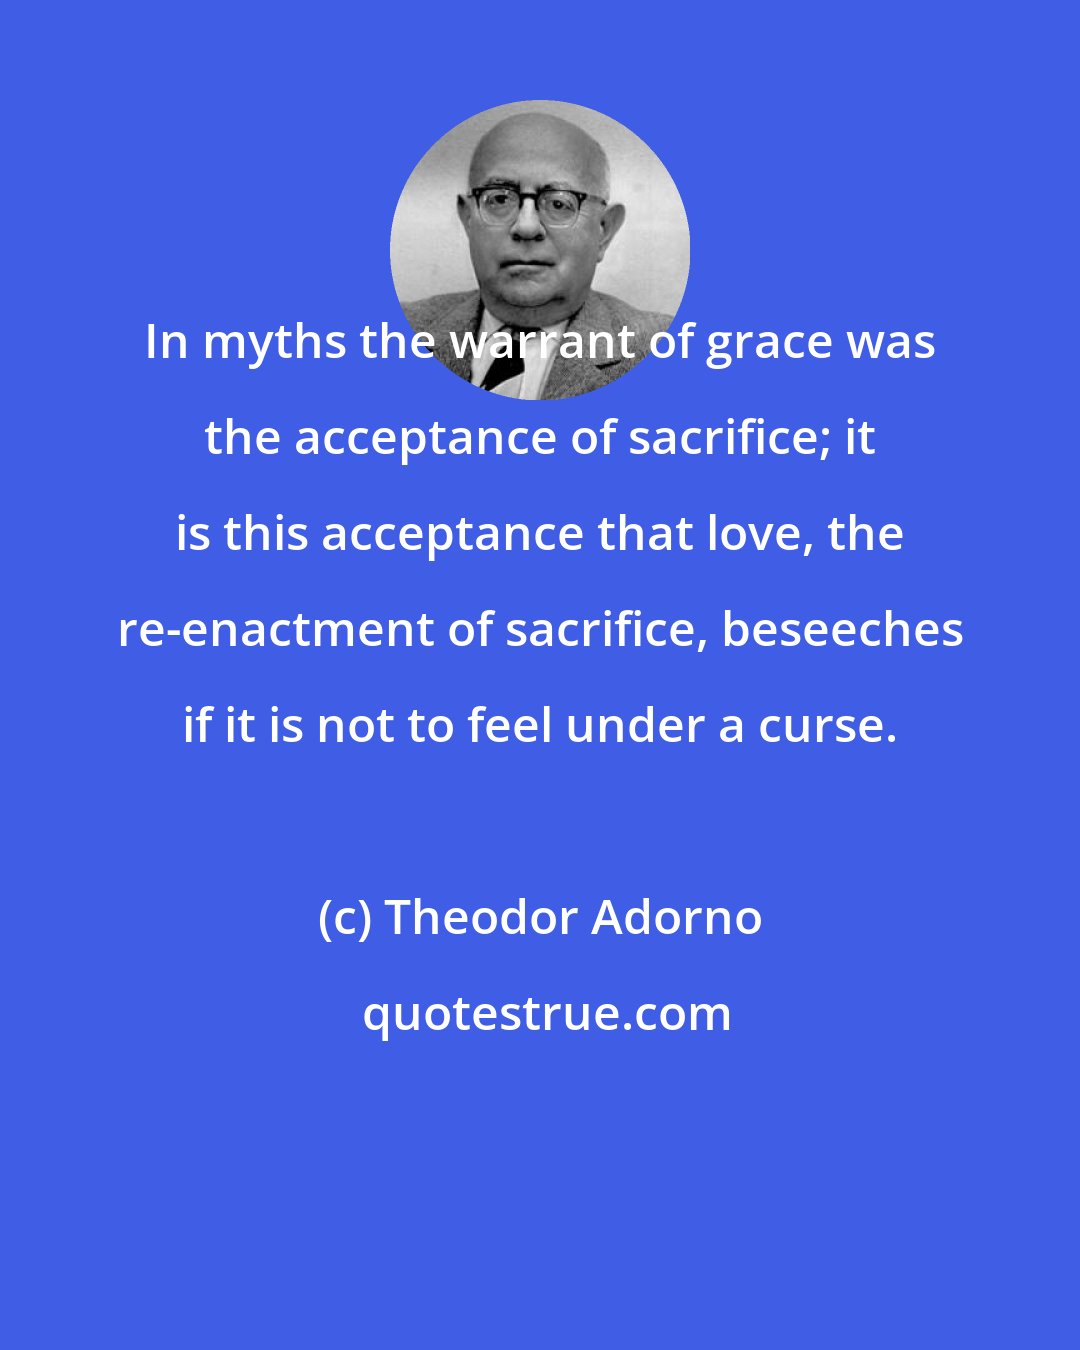 Theodor Adorno: In myths the warrant of grace was the acceptance of sacrifice; it is this acceptance that love, the re-enactment of sacrifice, beseeches if it is not to feel under a curse.